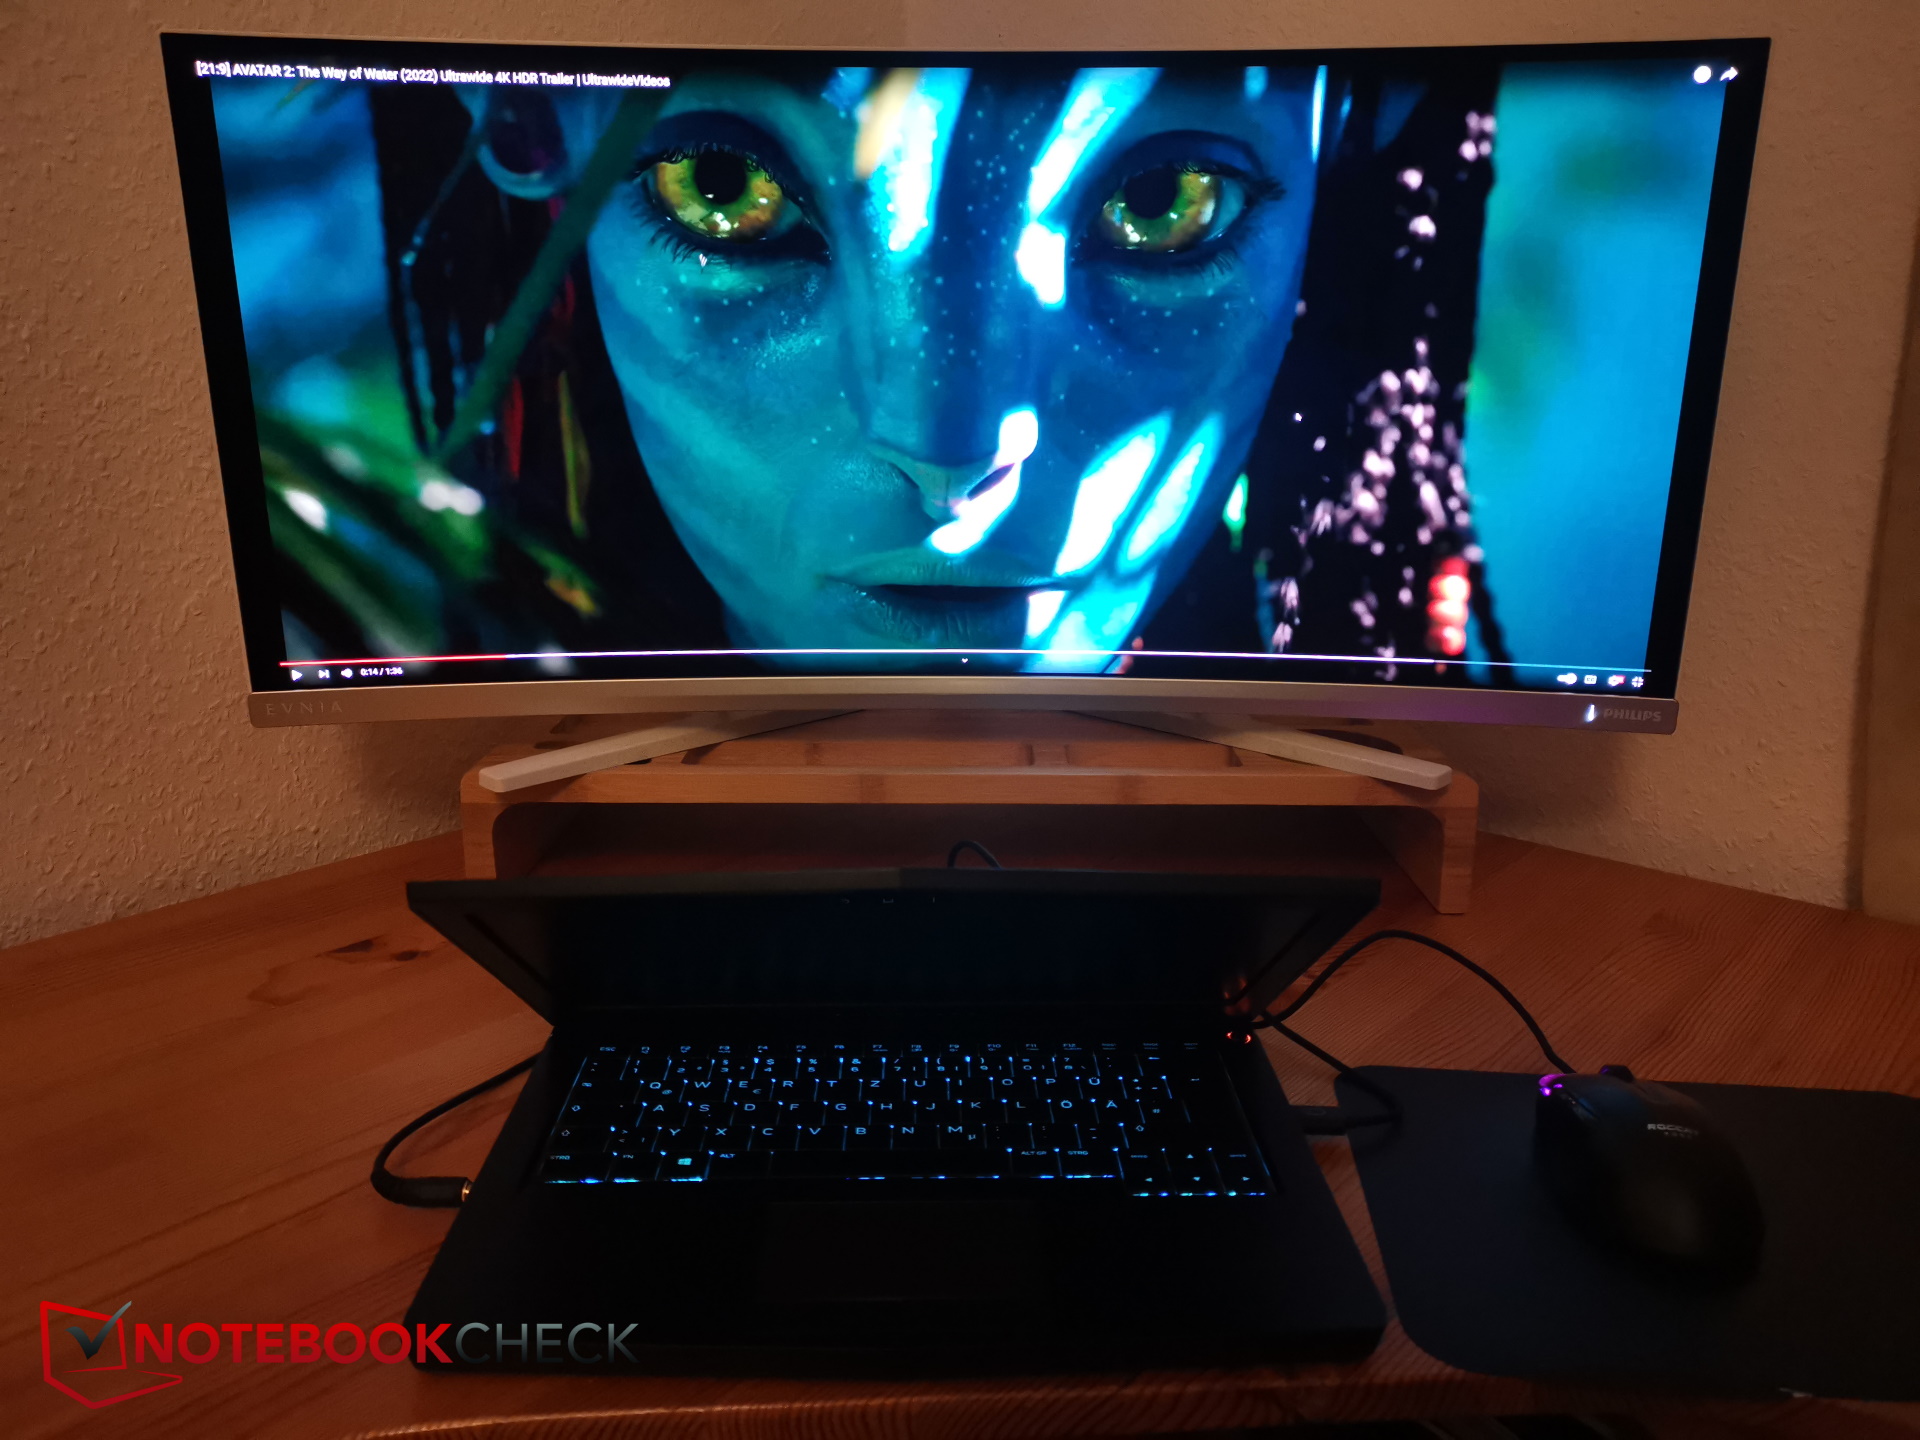 Philips Evnia 34M2C8600 Monitor Test: Finally a 34-inch 21:9 Full HD OLED Monitor for Gamers